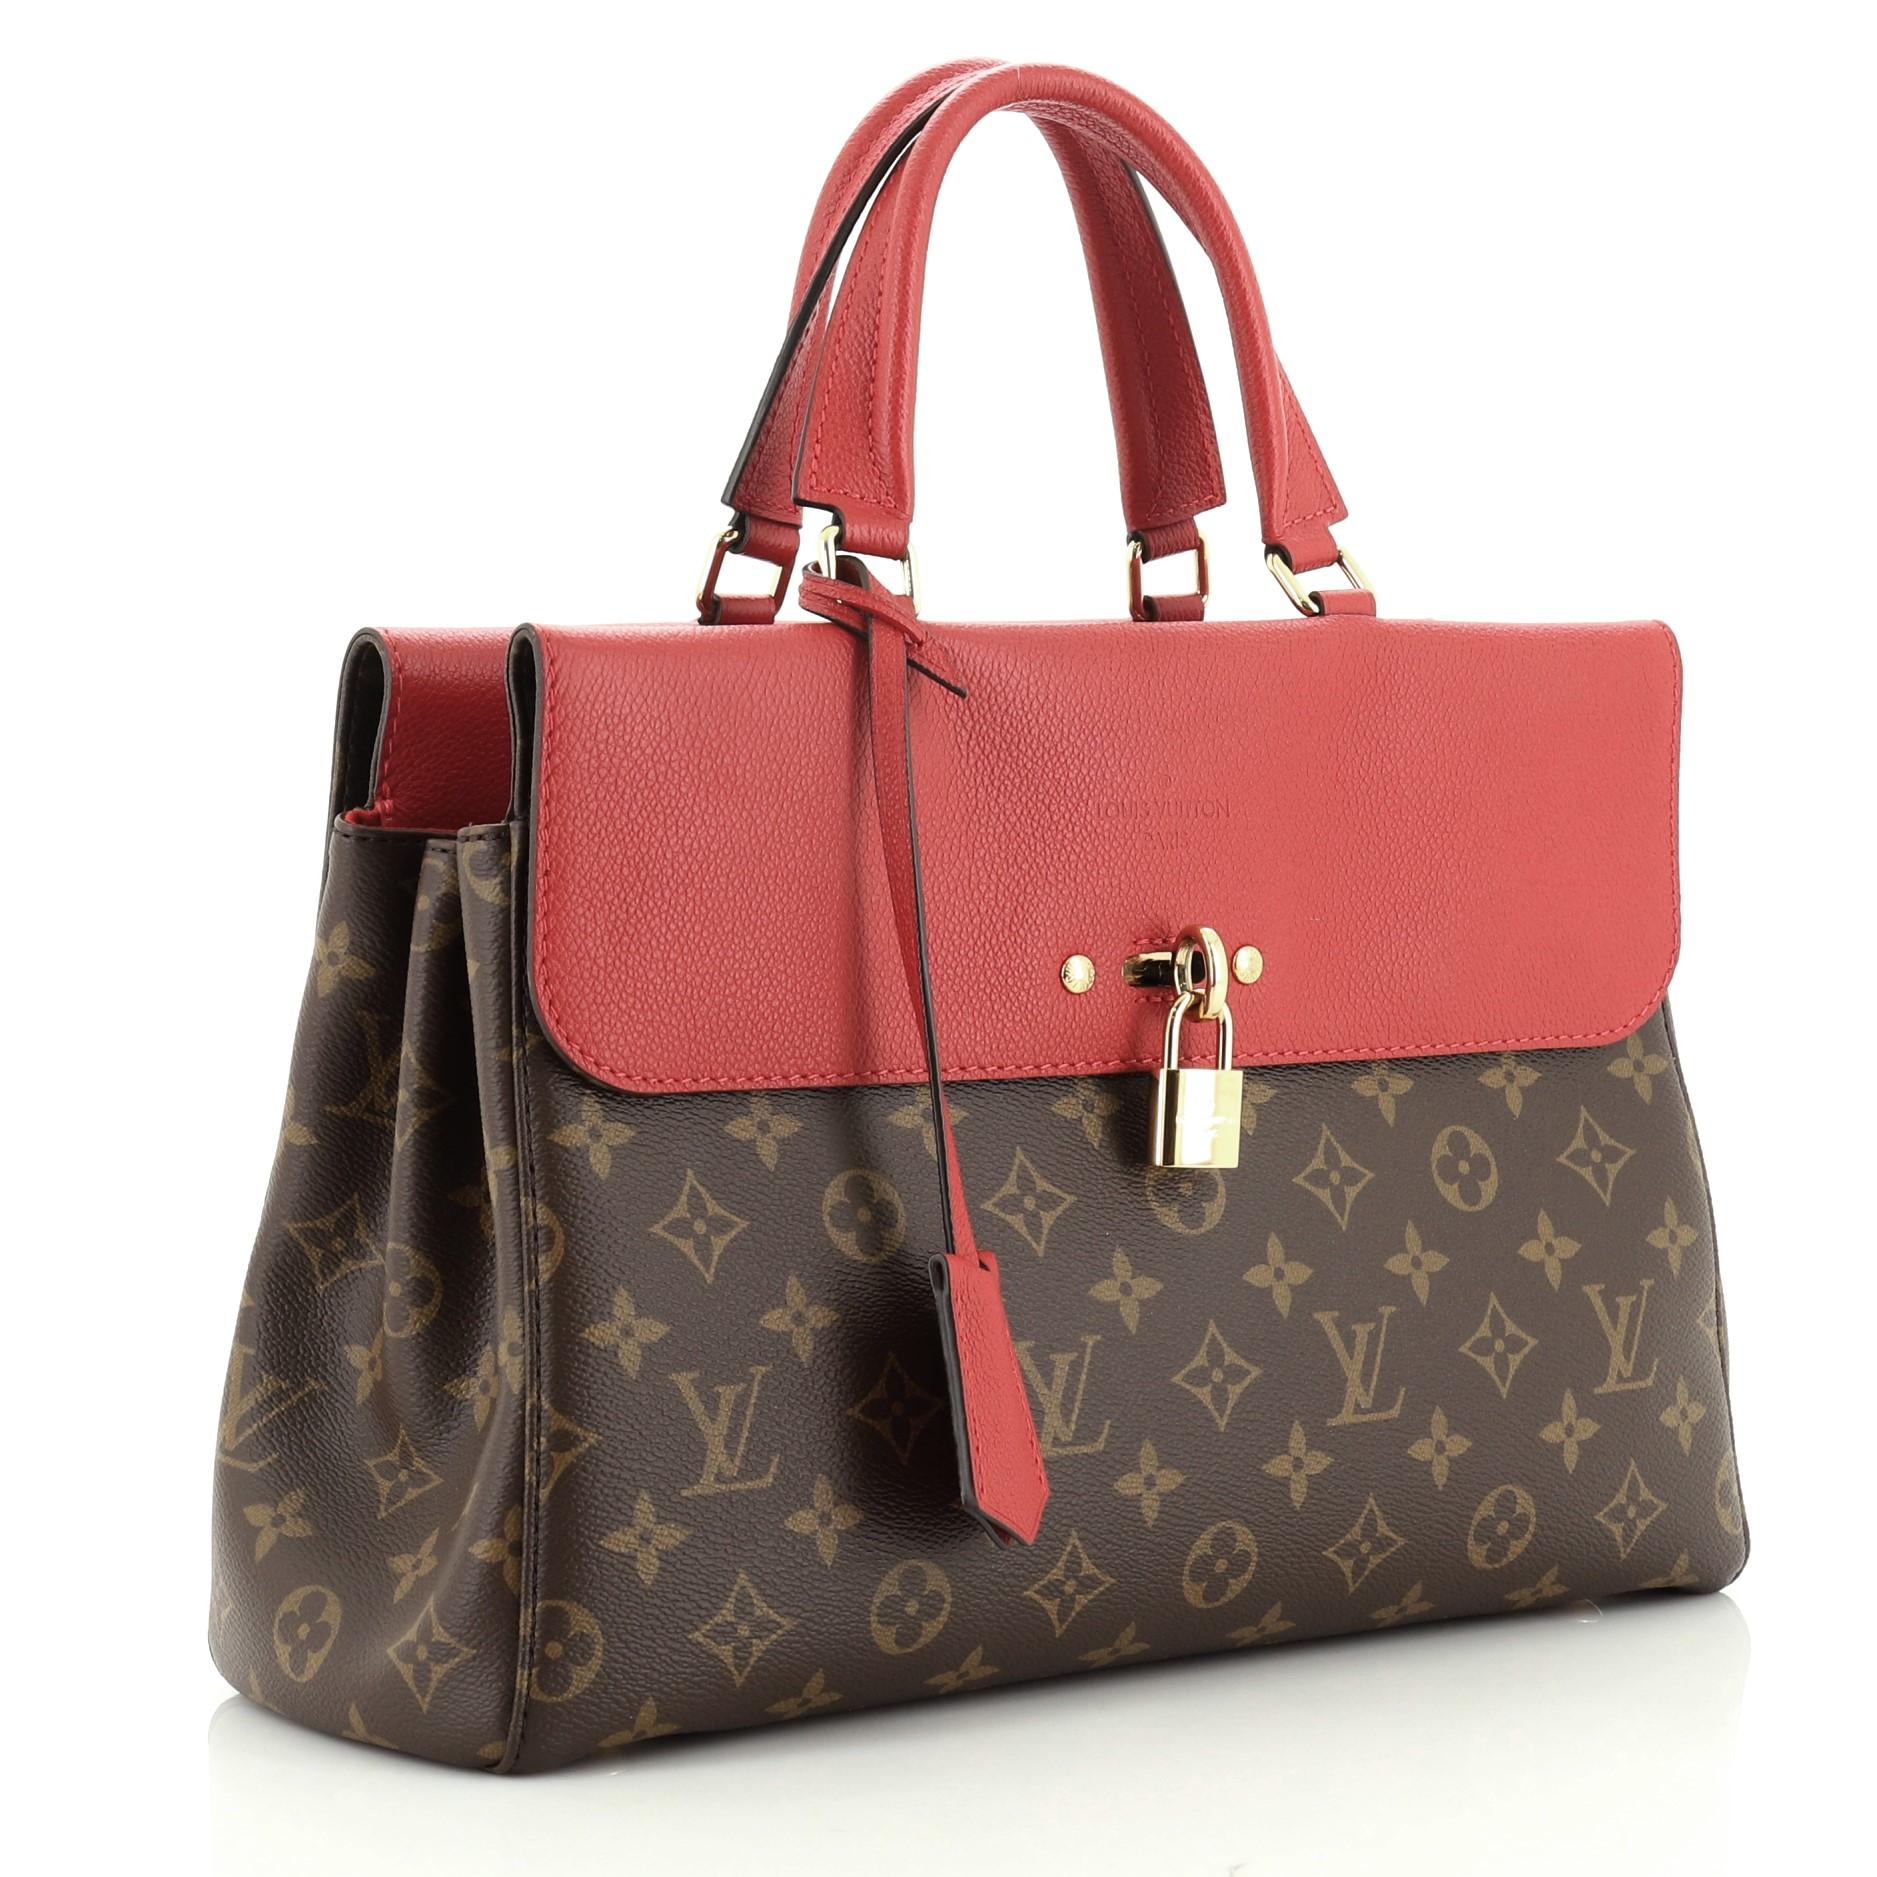 This Louis Vuitton Venus Handbag Monogram Canvas and Leather, crafted from brown monogram coated canvas and red leather, features dual leather handles, exterior front and back compartments, and gold-tone hardware. Its hook clasp closure opens to a